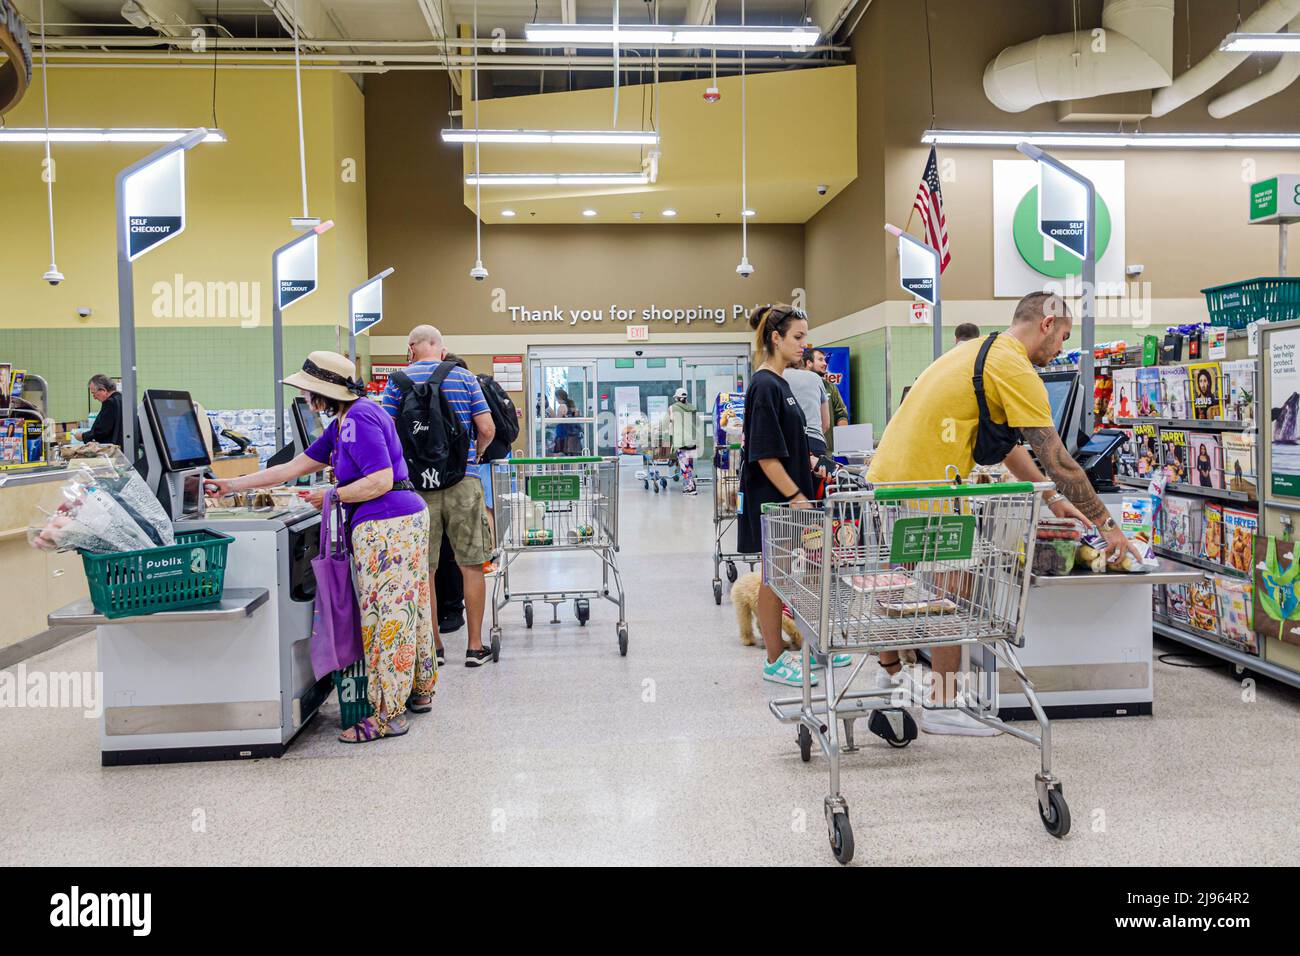 Miami Beach Florida,Publix grocery store supermarket inside interior,checkout line queue self-service shoppers customers buying Stock Photo